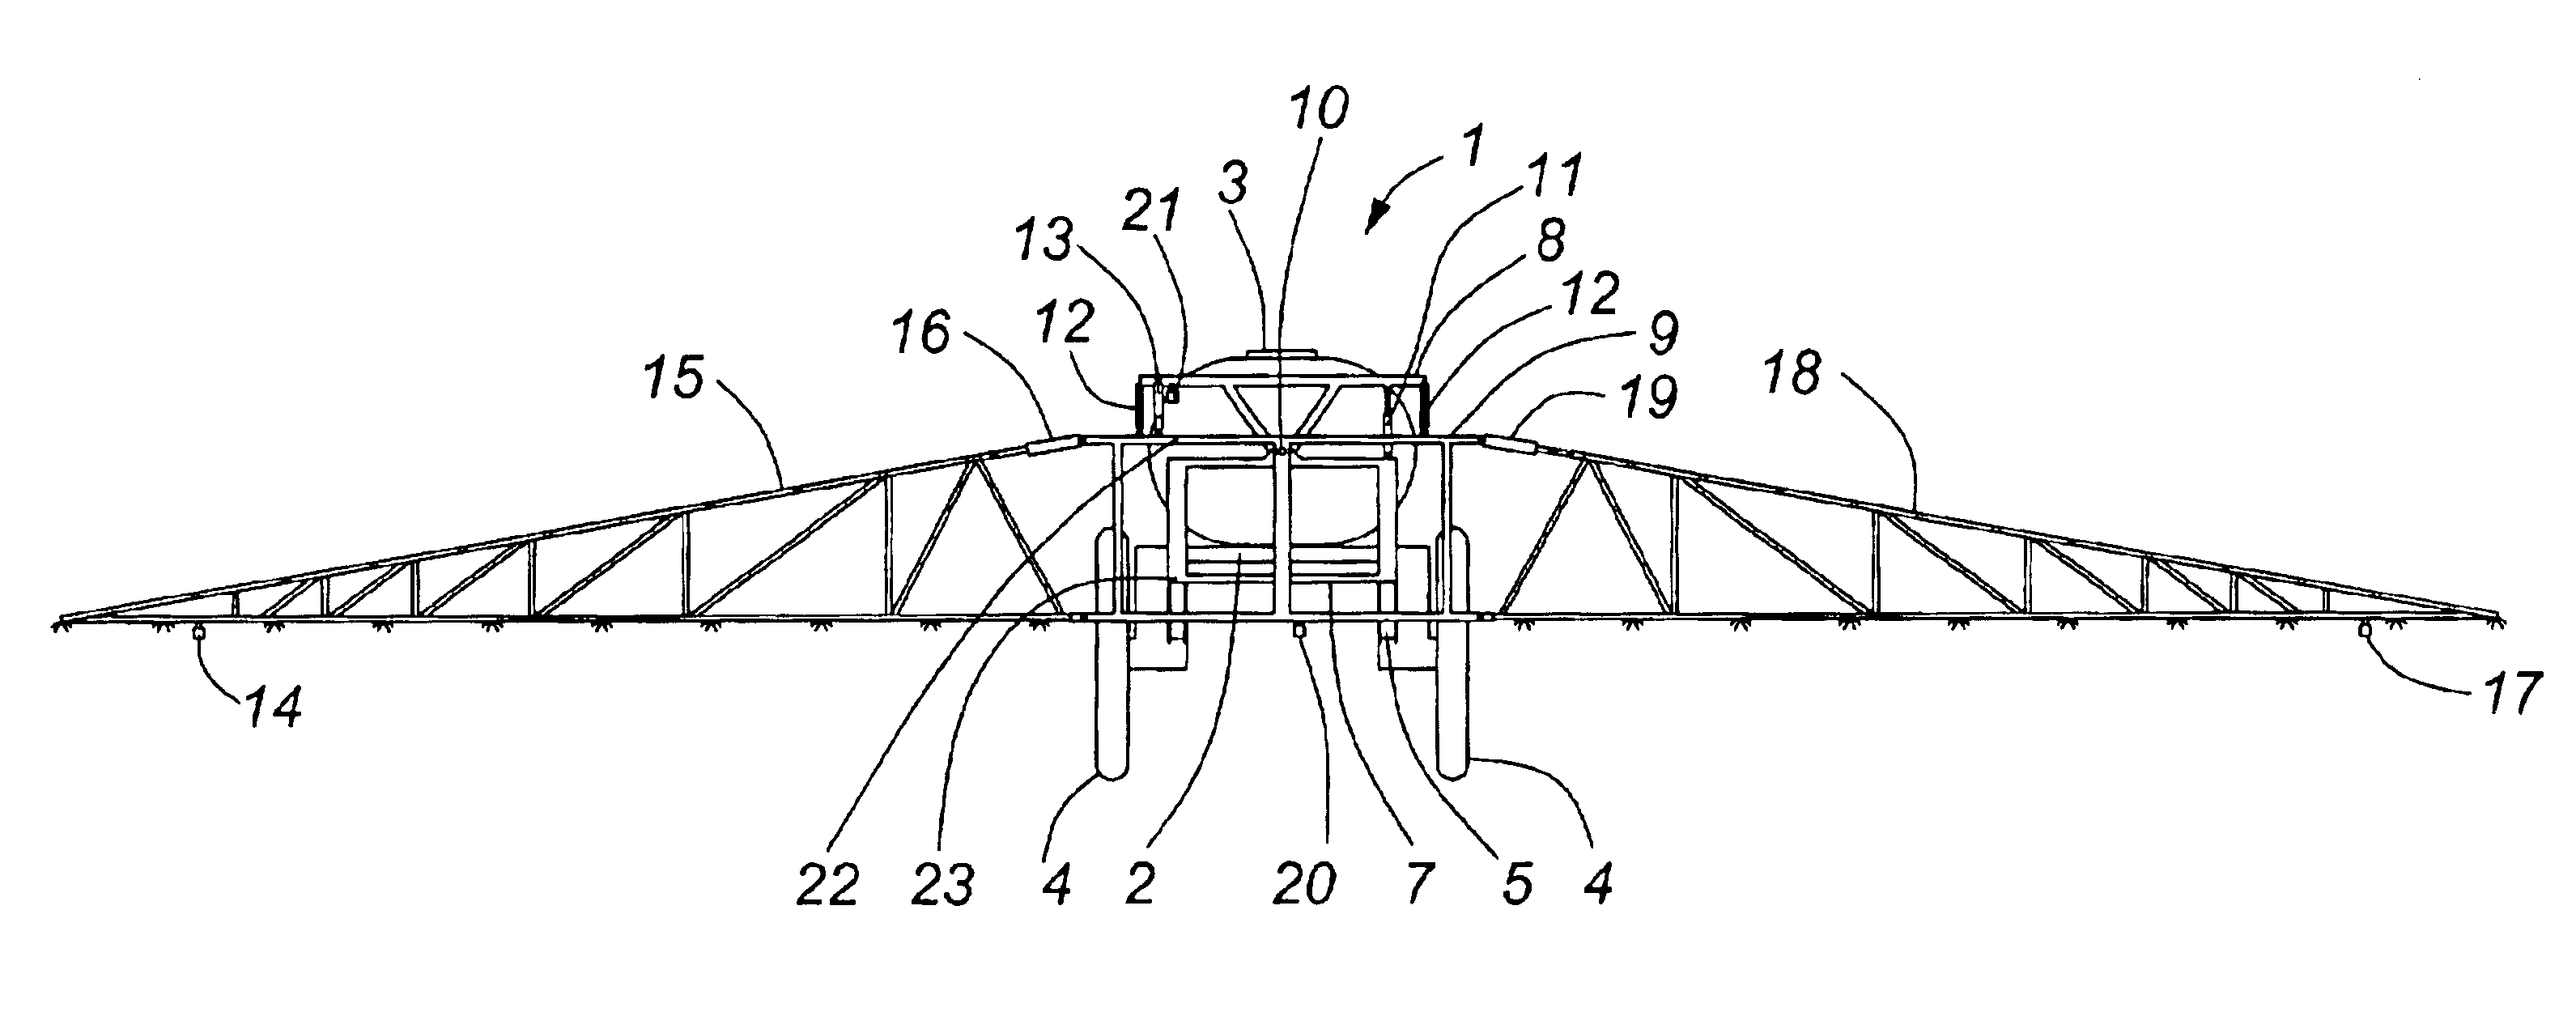 Roll control system and method for a suspended boom